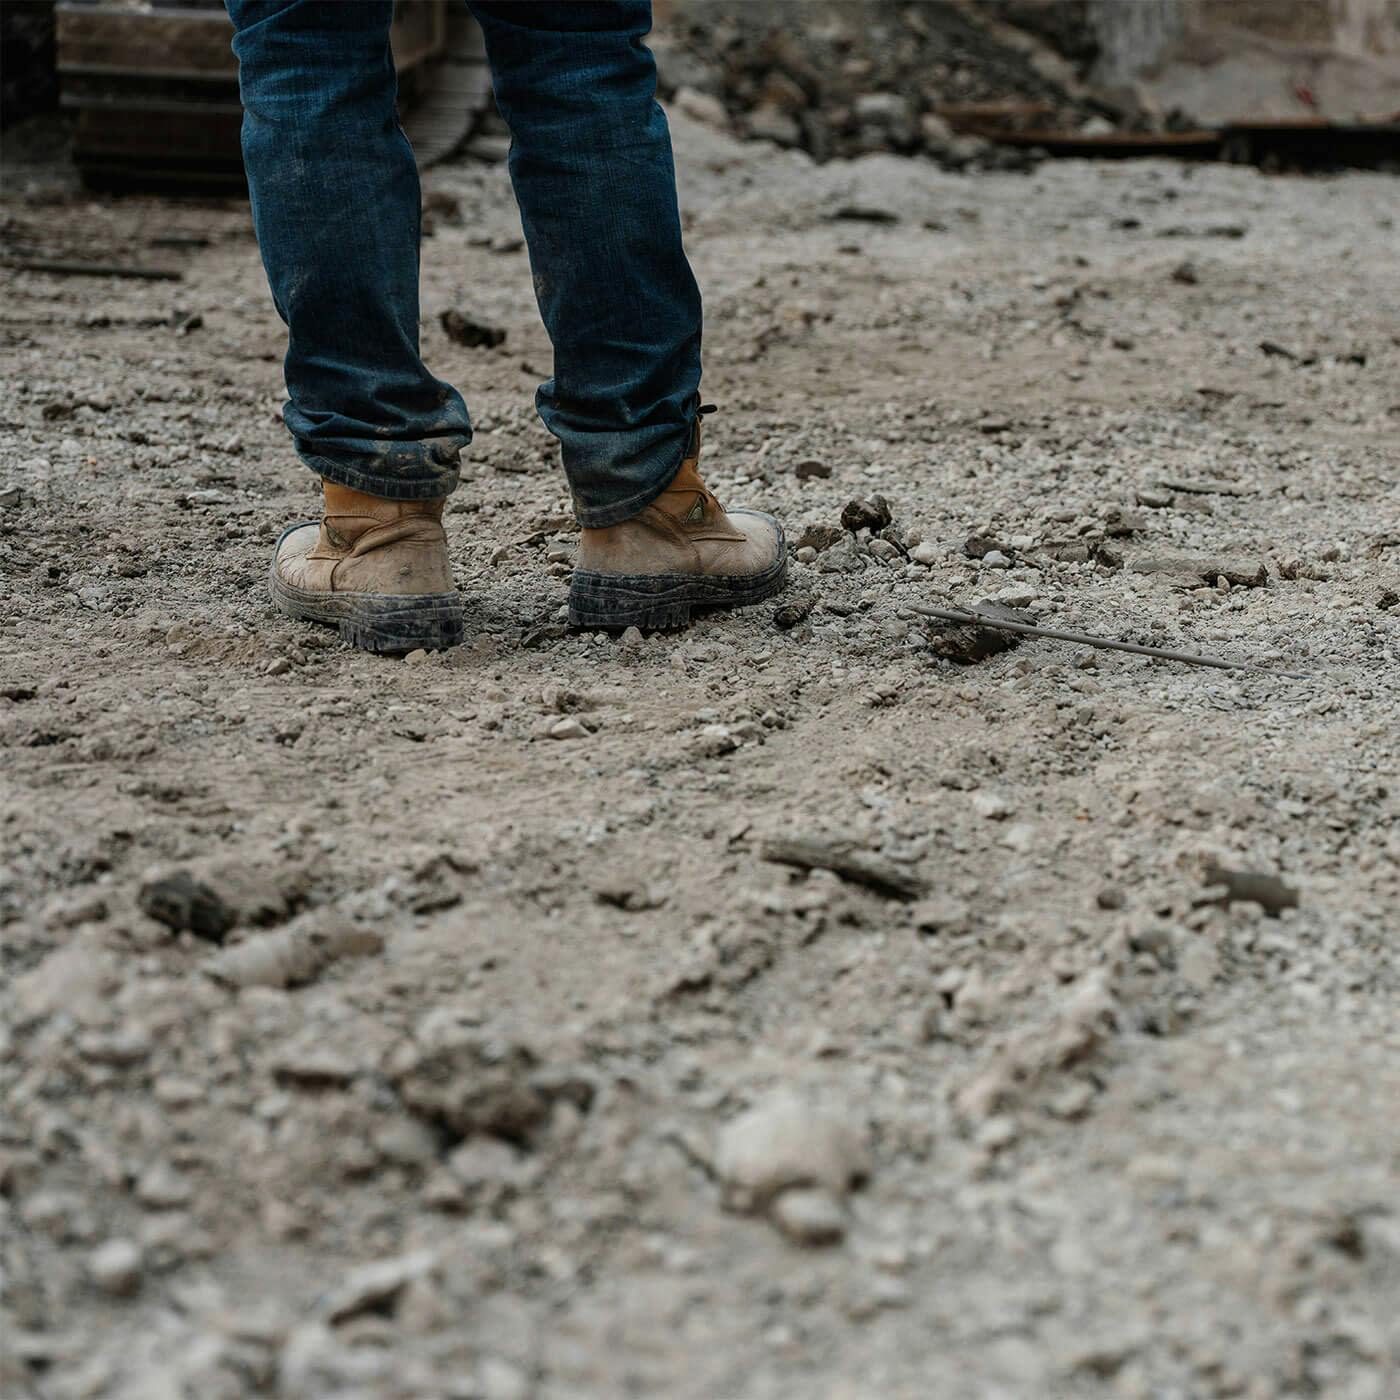 Construction worker wearing boots on a jobsite